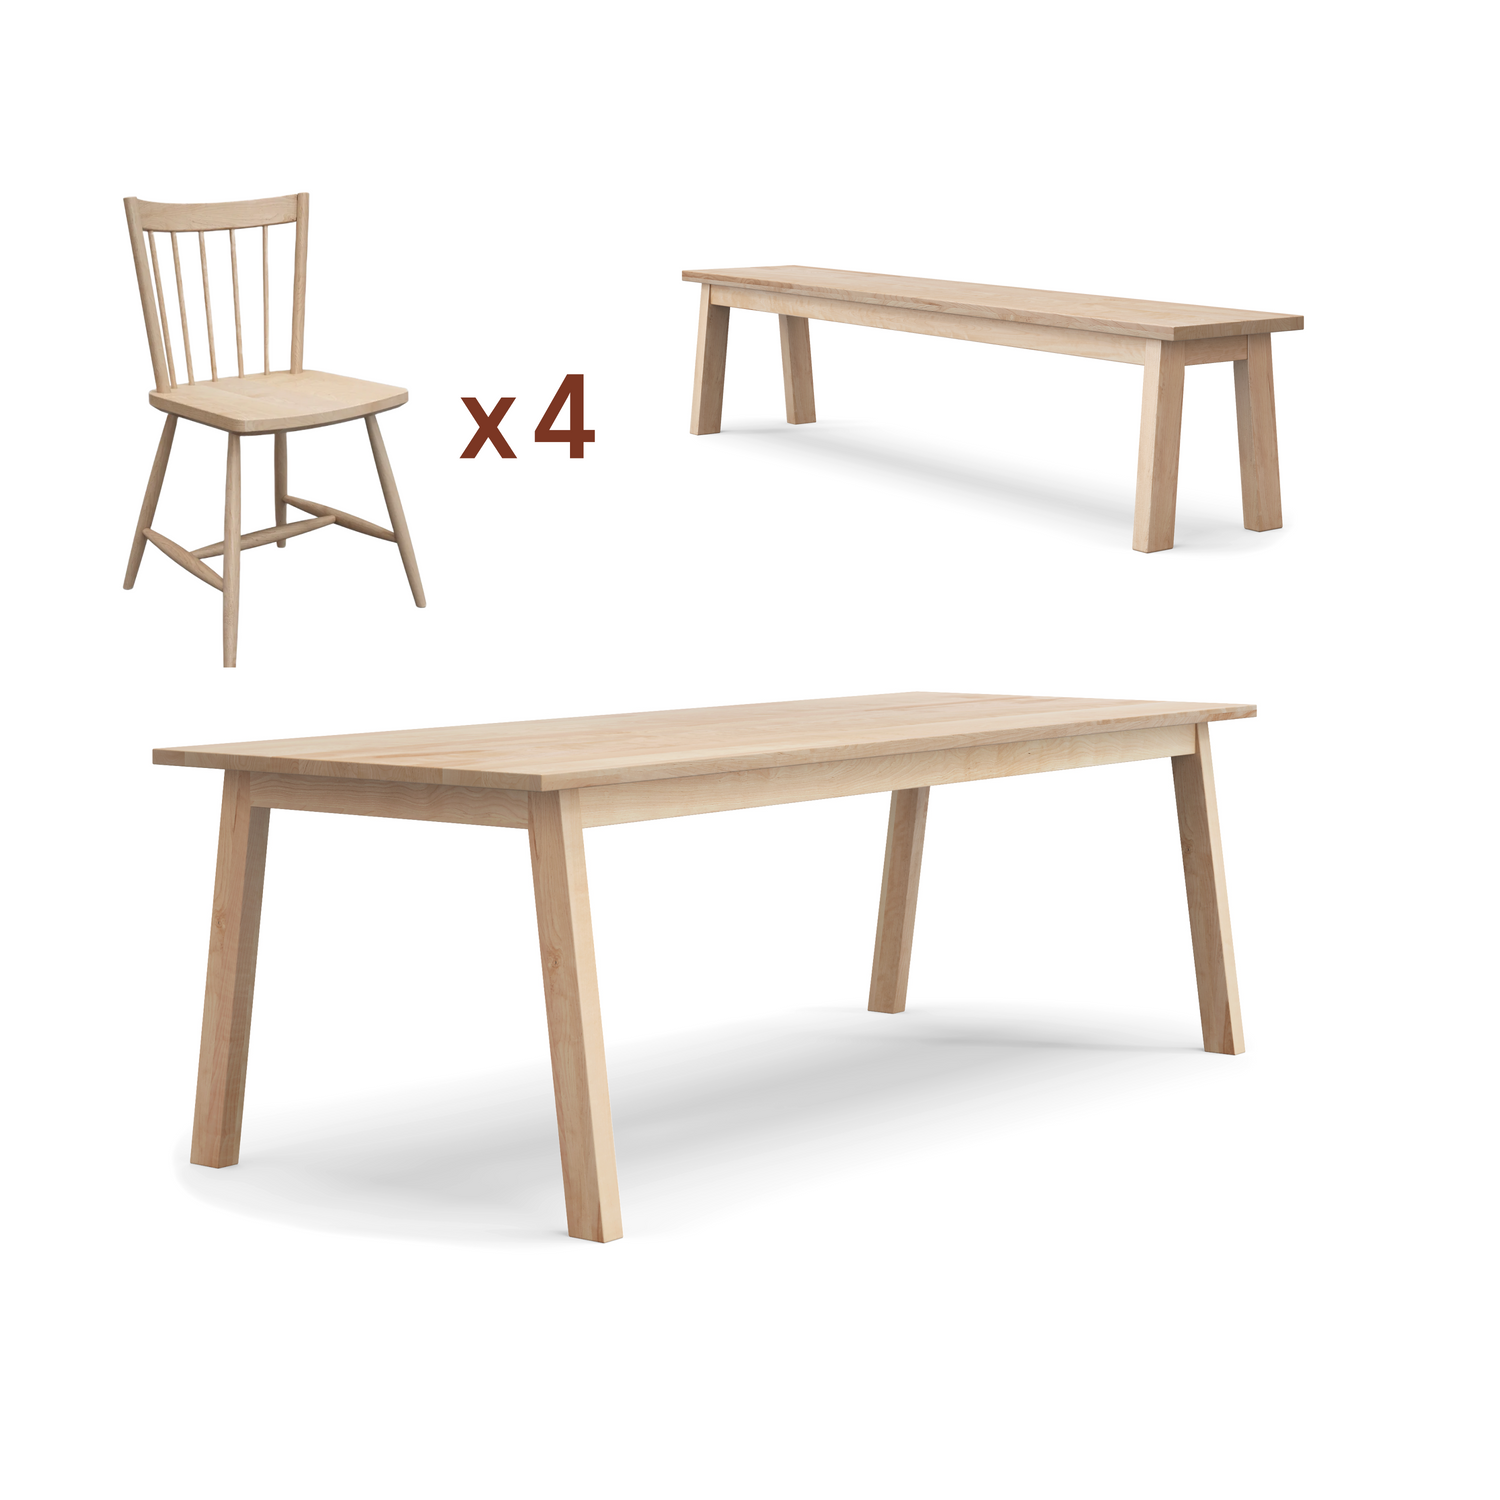 Luft table + chairs + bench